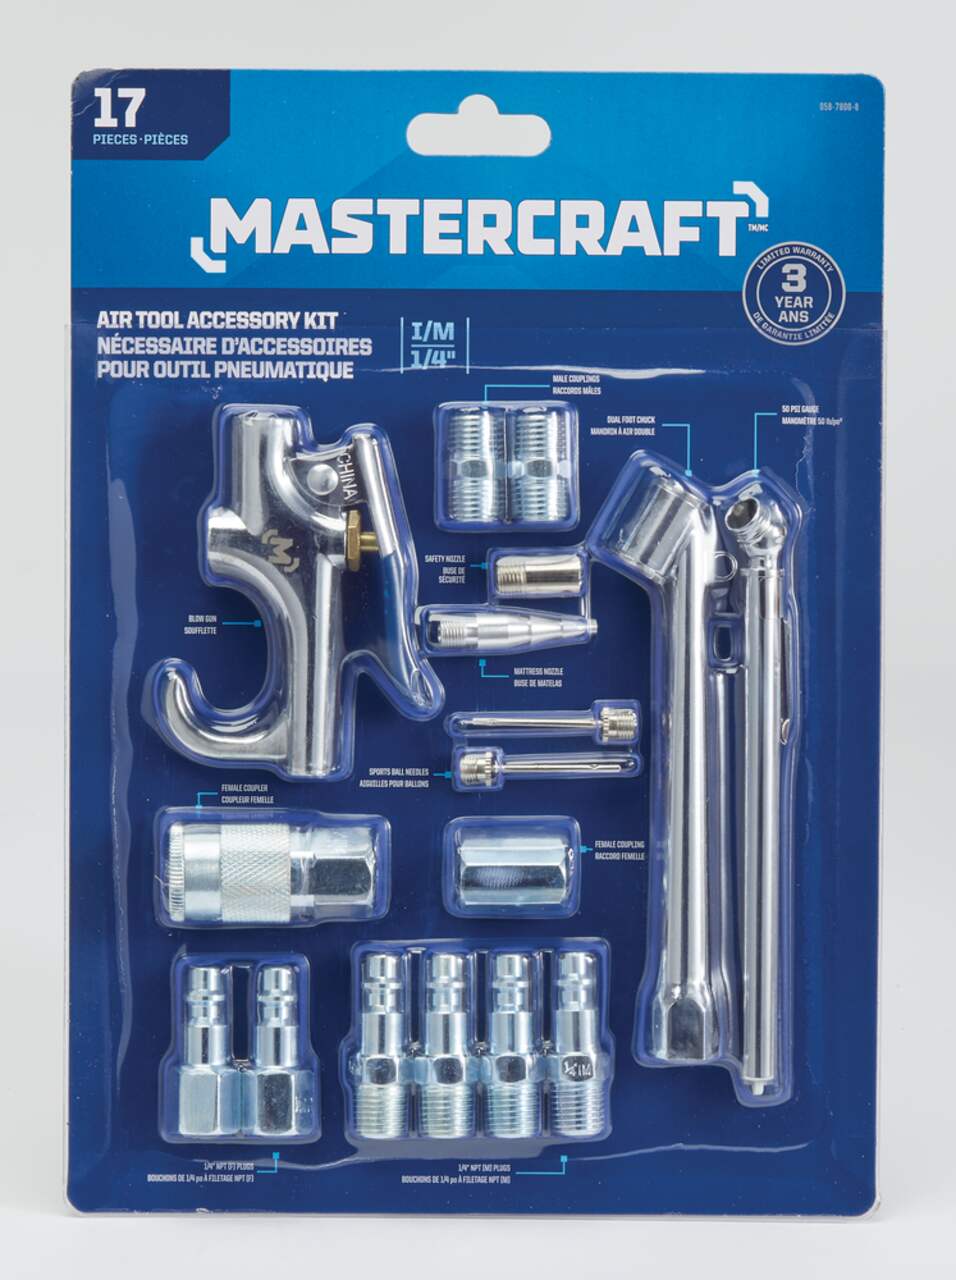 https://media-www.canadiantire.ca/product/fixing/tools/air-tools-accessories/0587800/mastercraft-17pc-pneumatic-accessory-kit-9764cd36-e2fe-4e80-86e3-700b8edaed6a.png?imdensity=1&imwidth=640&impolicy=mZoom